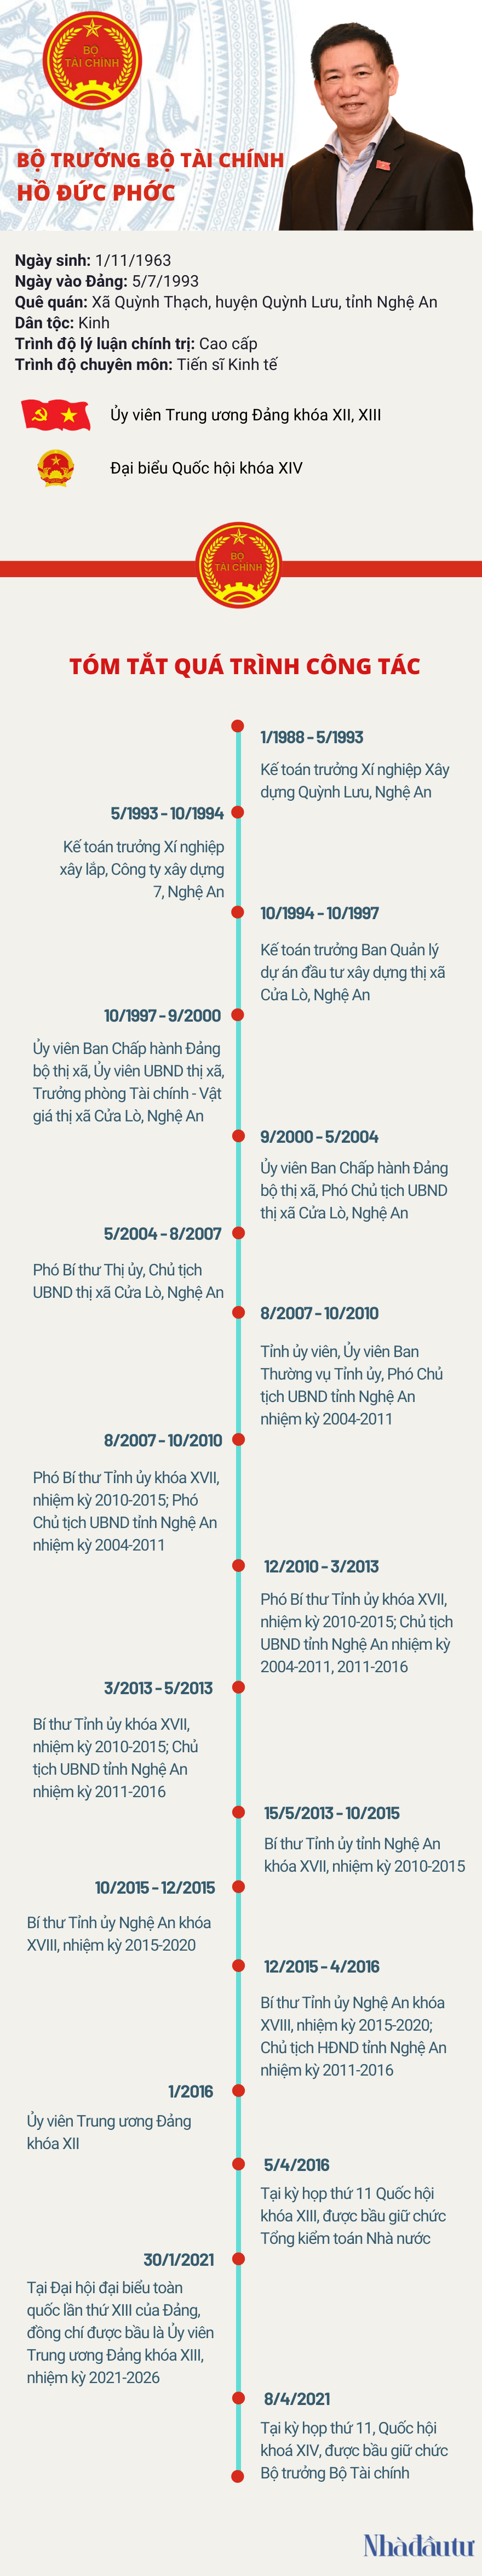 Volleyball History Timeline Infographic (1)